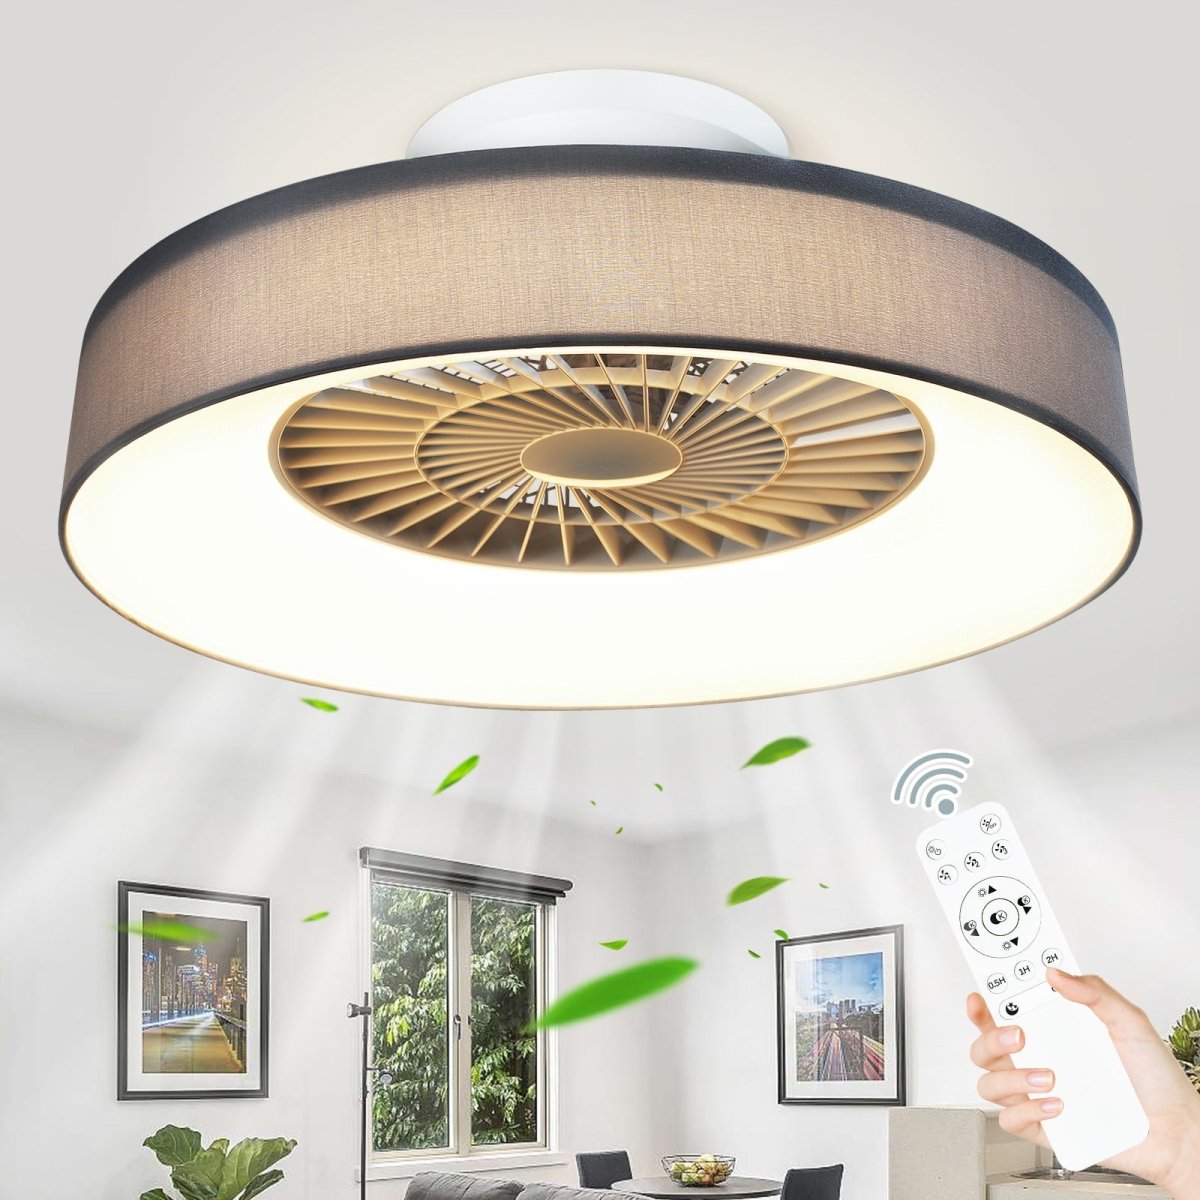 DLLT Low Profile Ceiling Fan with Light, 22.5'' LED Dimmable Ceiling Fans with Lights and Remote, Modern Bladeless Enclosed Ceiling Fan Flush Mount with Reverse Motor for Bedroom Living Room, Gray - WS-FPZ47-40C-GY 1 | DEPULEY